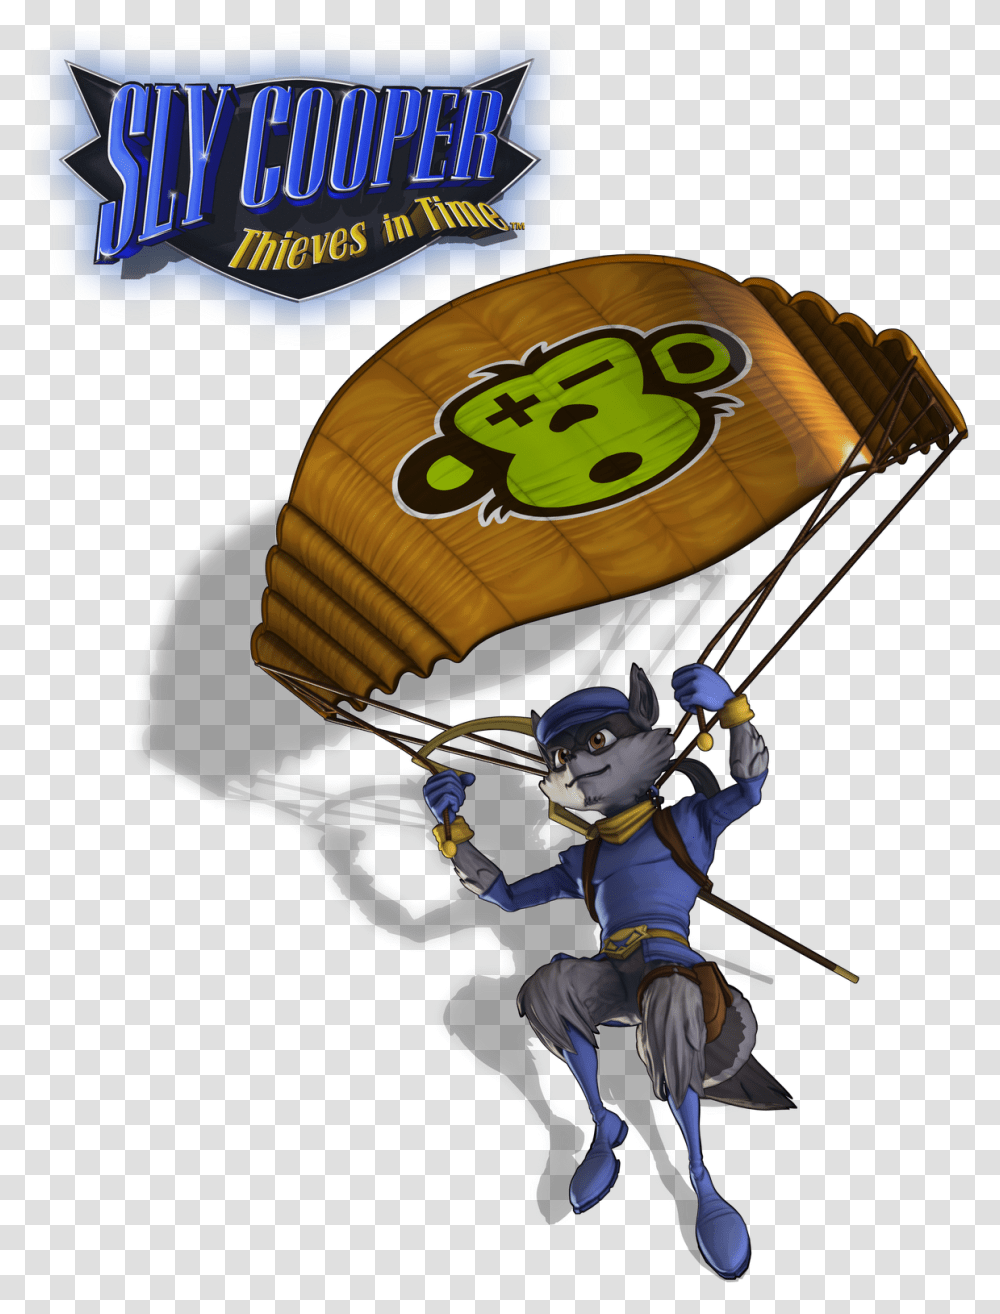 Sly Cooper Thieves In Time Game Ps3 Download Sly Cooper Thieves In Time, Person, Human, Adventure, Leisure Activities Transparent Png